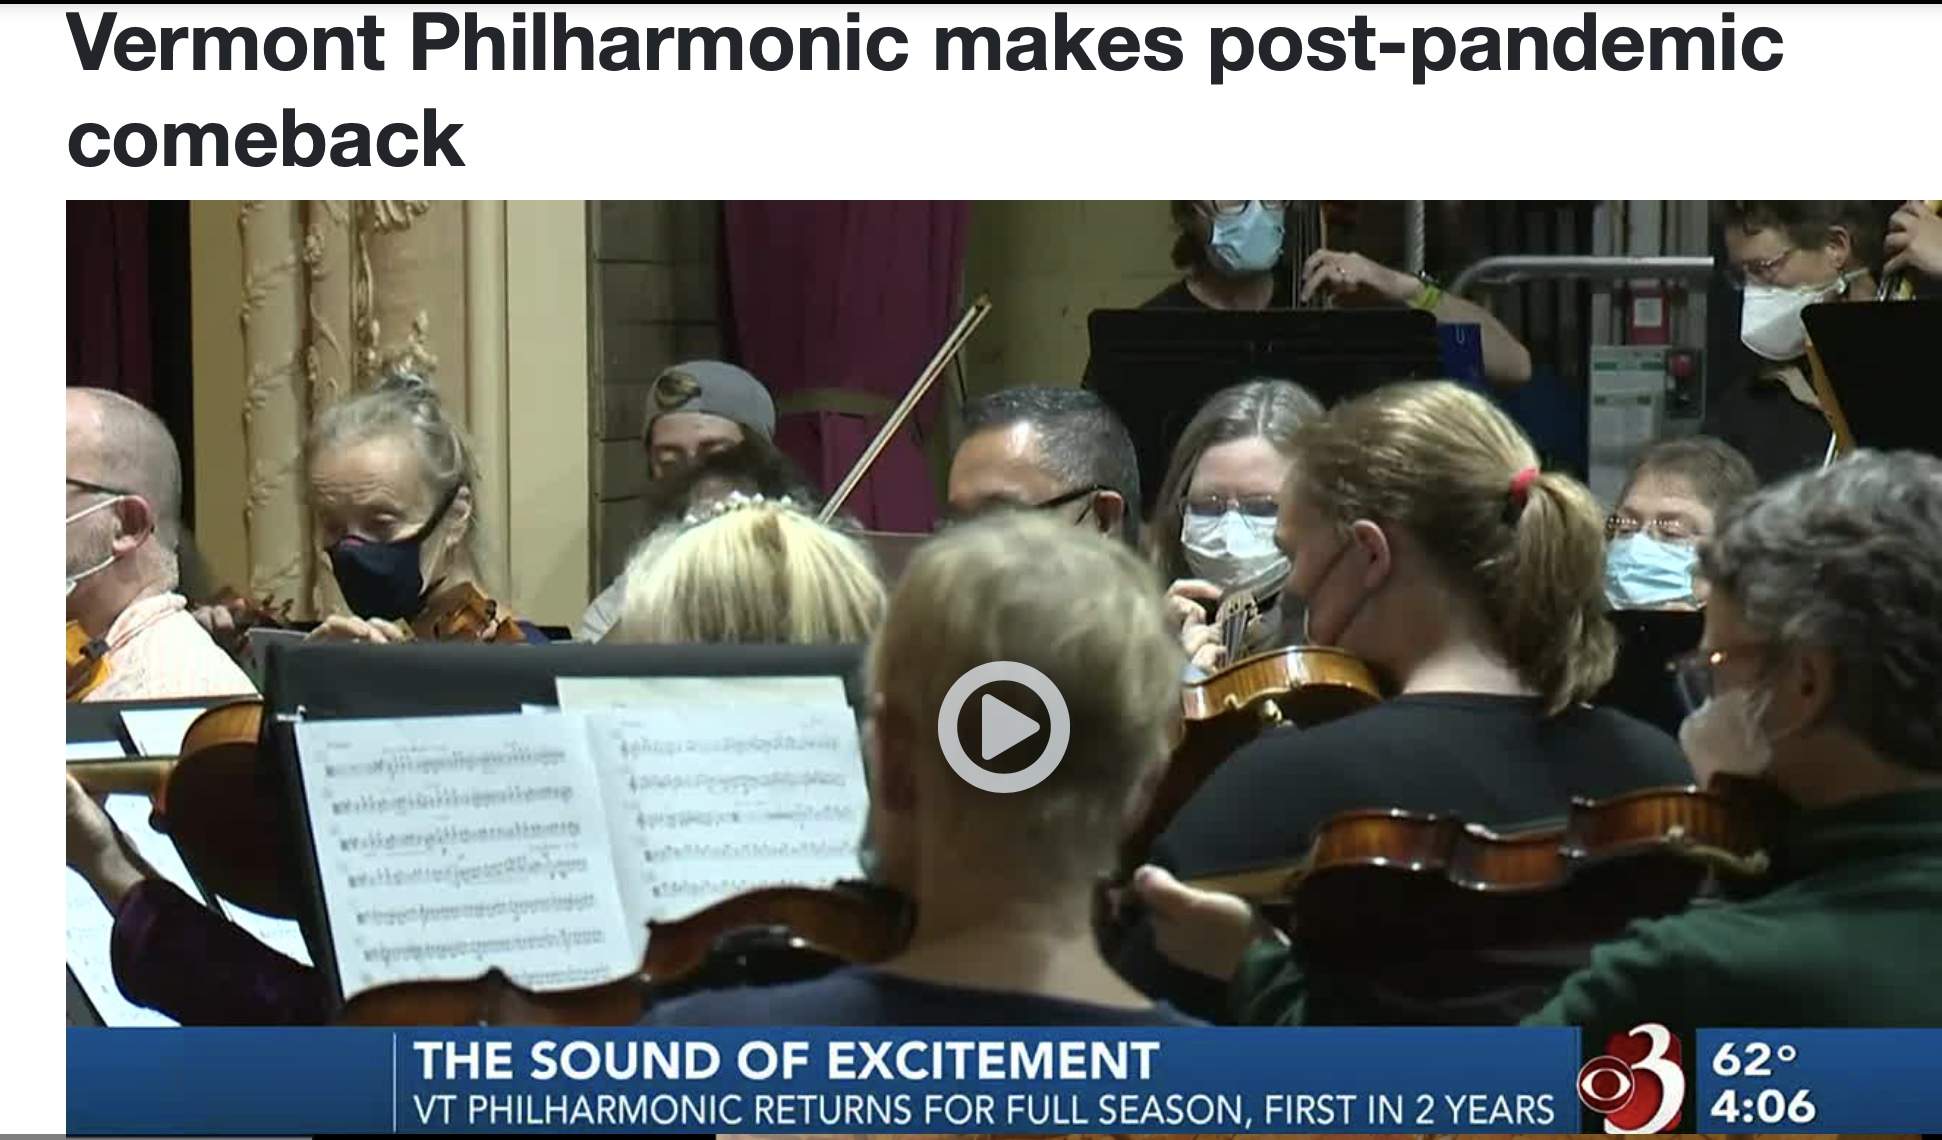 WCAX Video about the Vermont Philharmonic post pandemic return